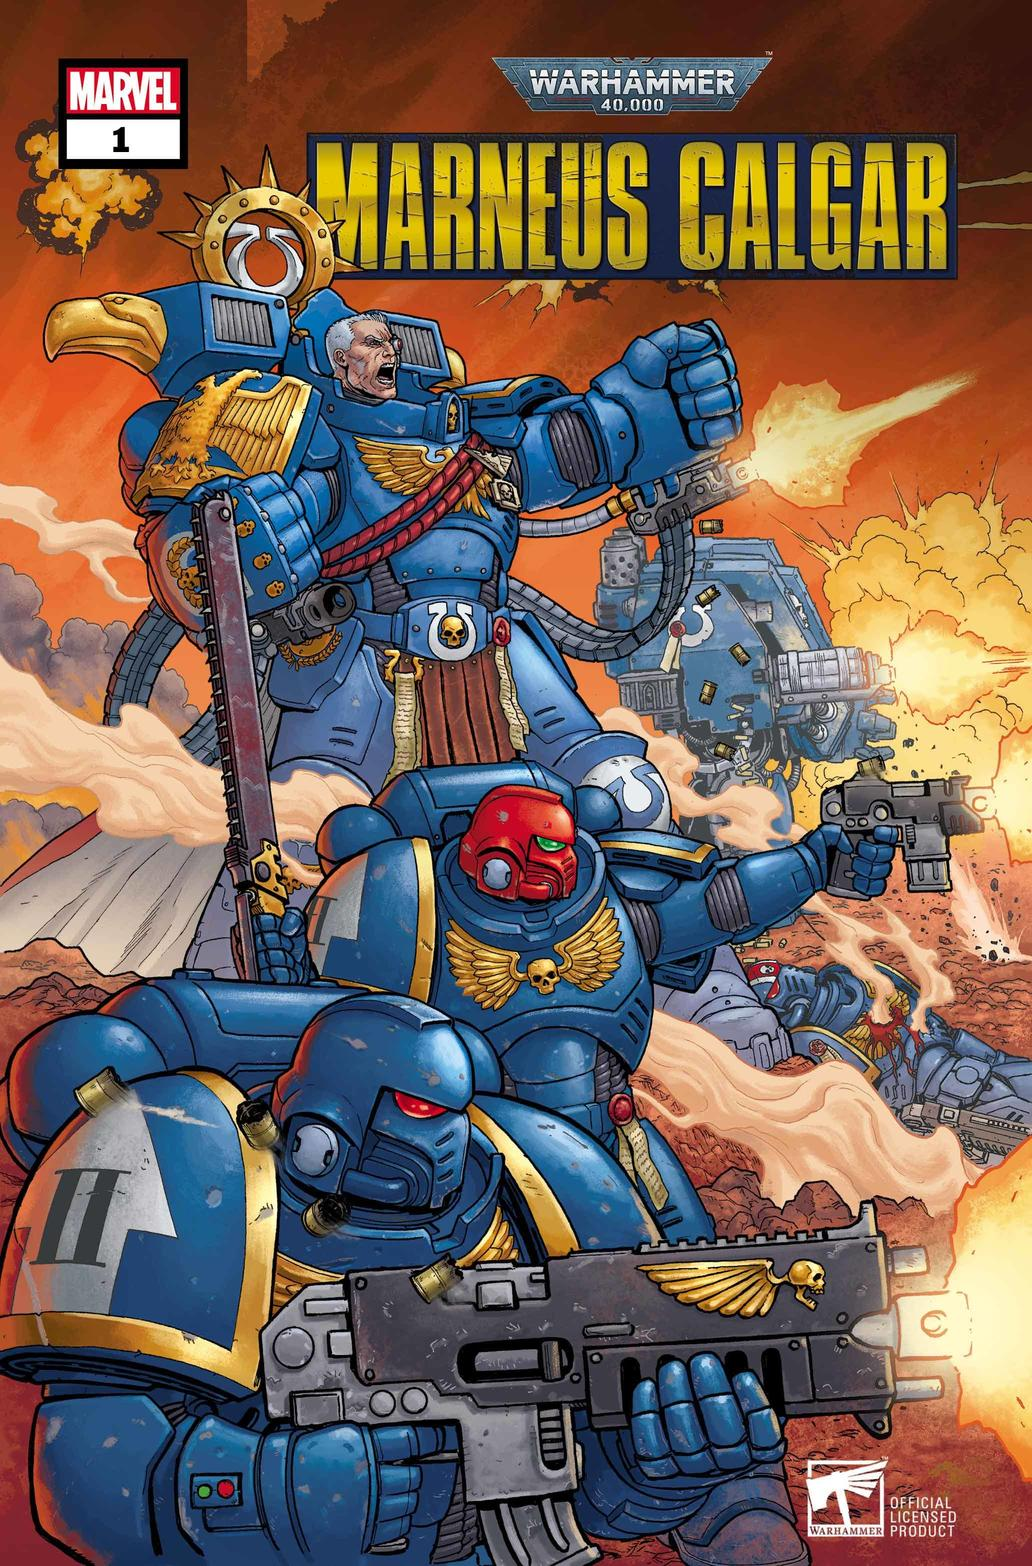 Marvel’s First Warhammer 40K Comic Is All About the Ultramarines